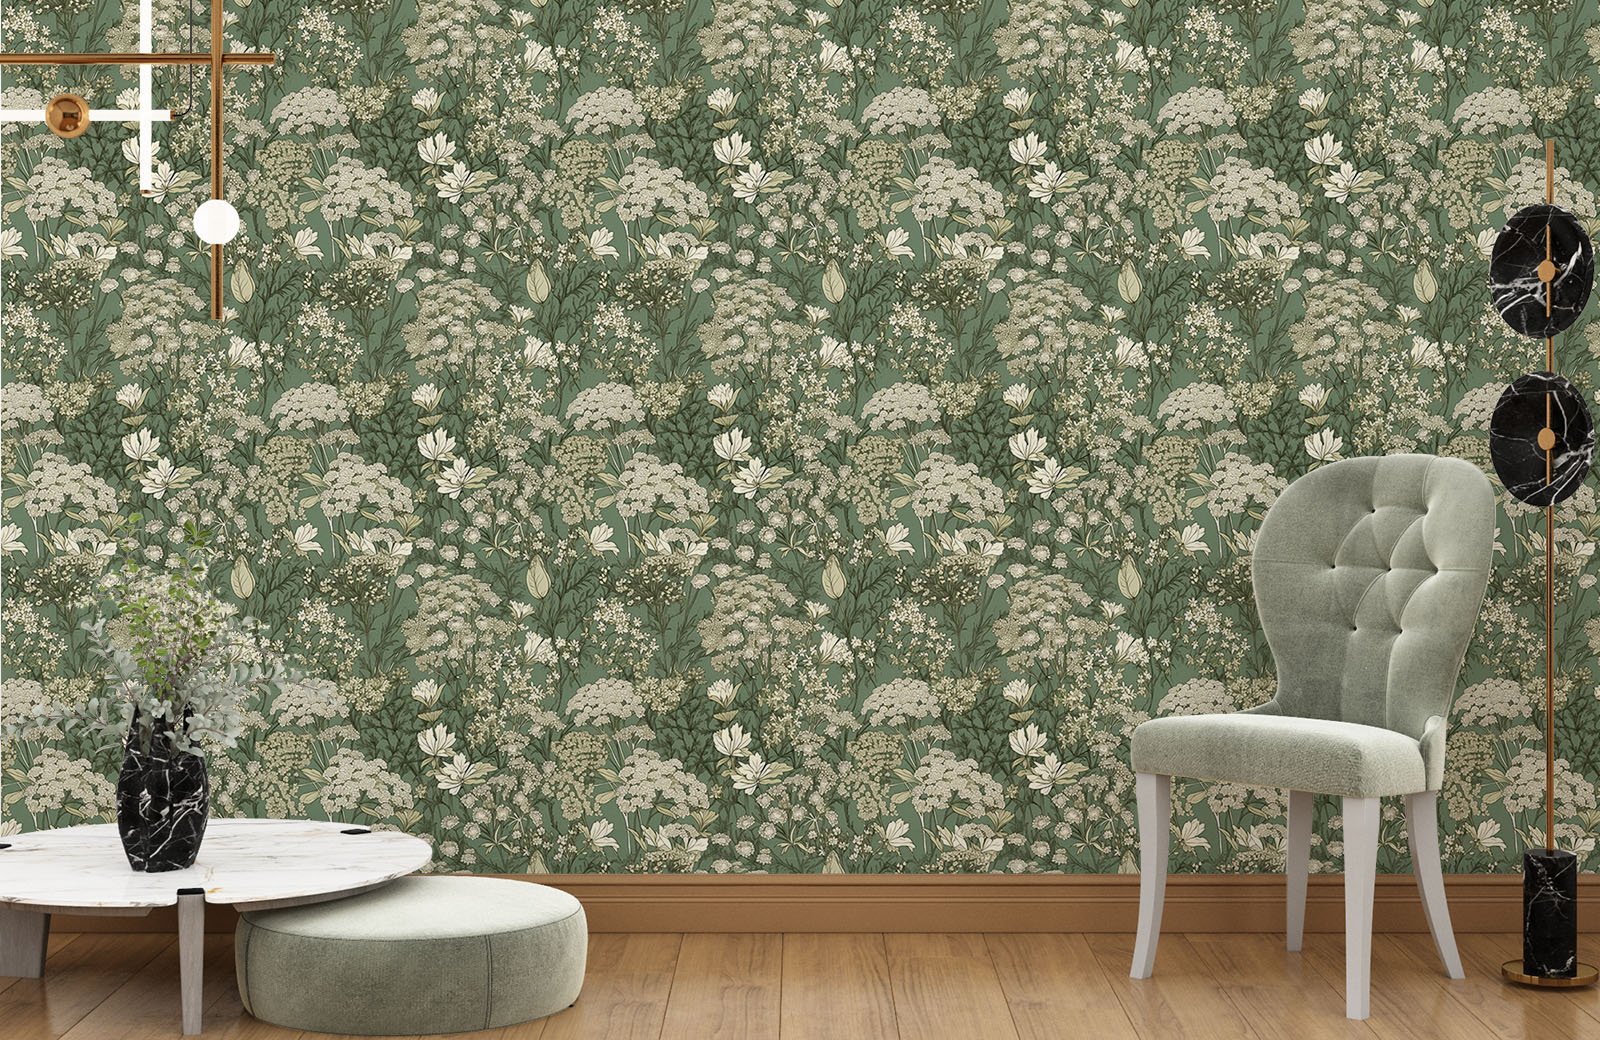 green-background-beige-flower-buds-wallpaper-with-chair